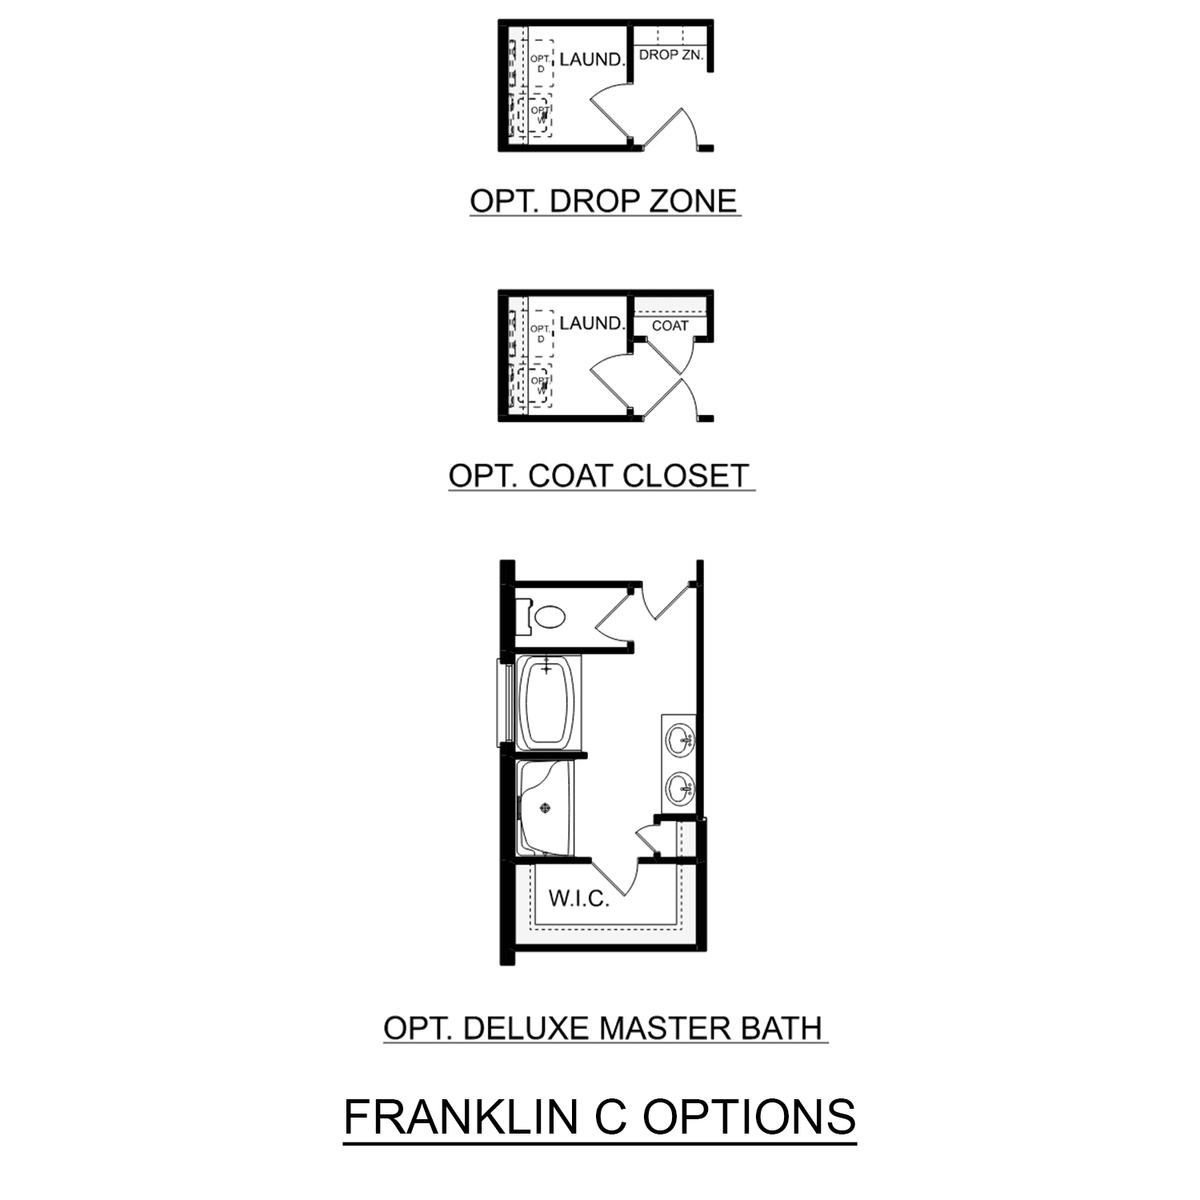 2 - The Franklin C floor plan layout for 6254 Pisgah Drive in Davidson Homes' Spragins Cove community.